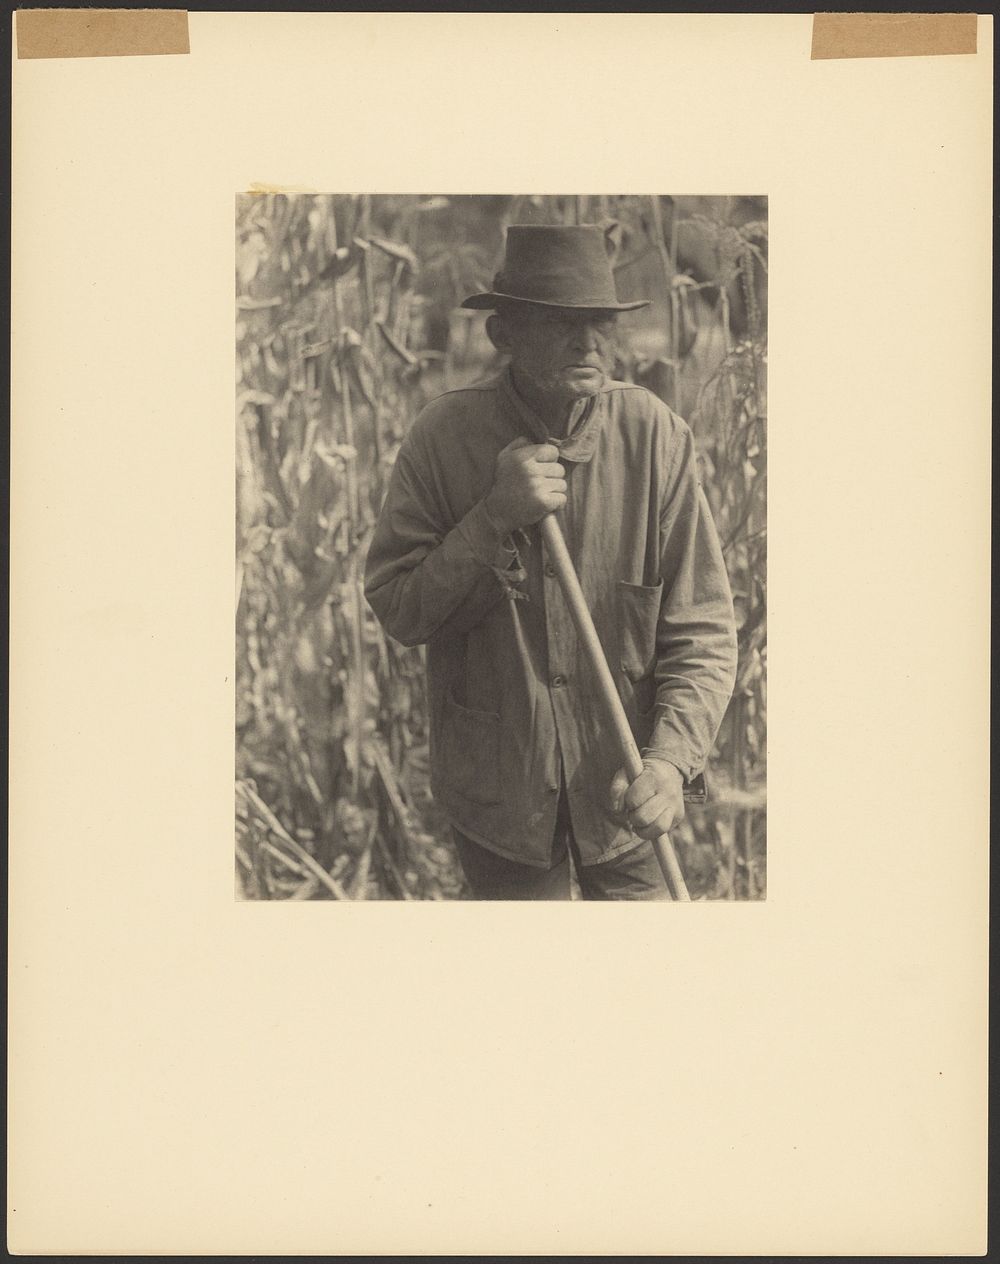 Man with Hoe in Sorghum Patch by Doris Ulmann